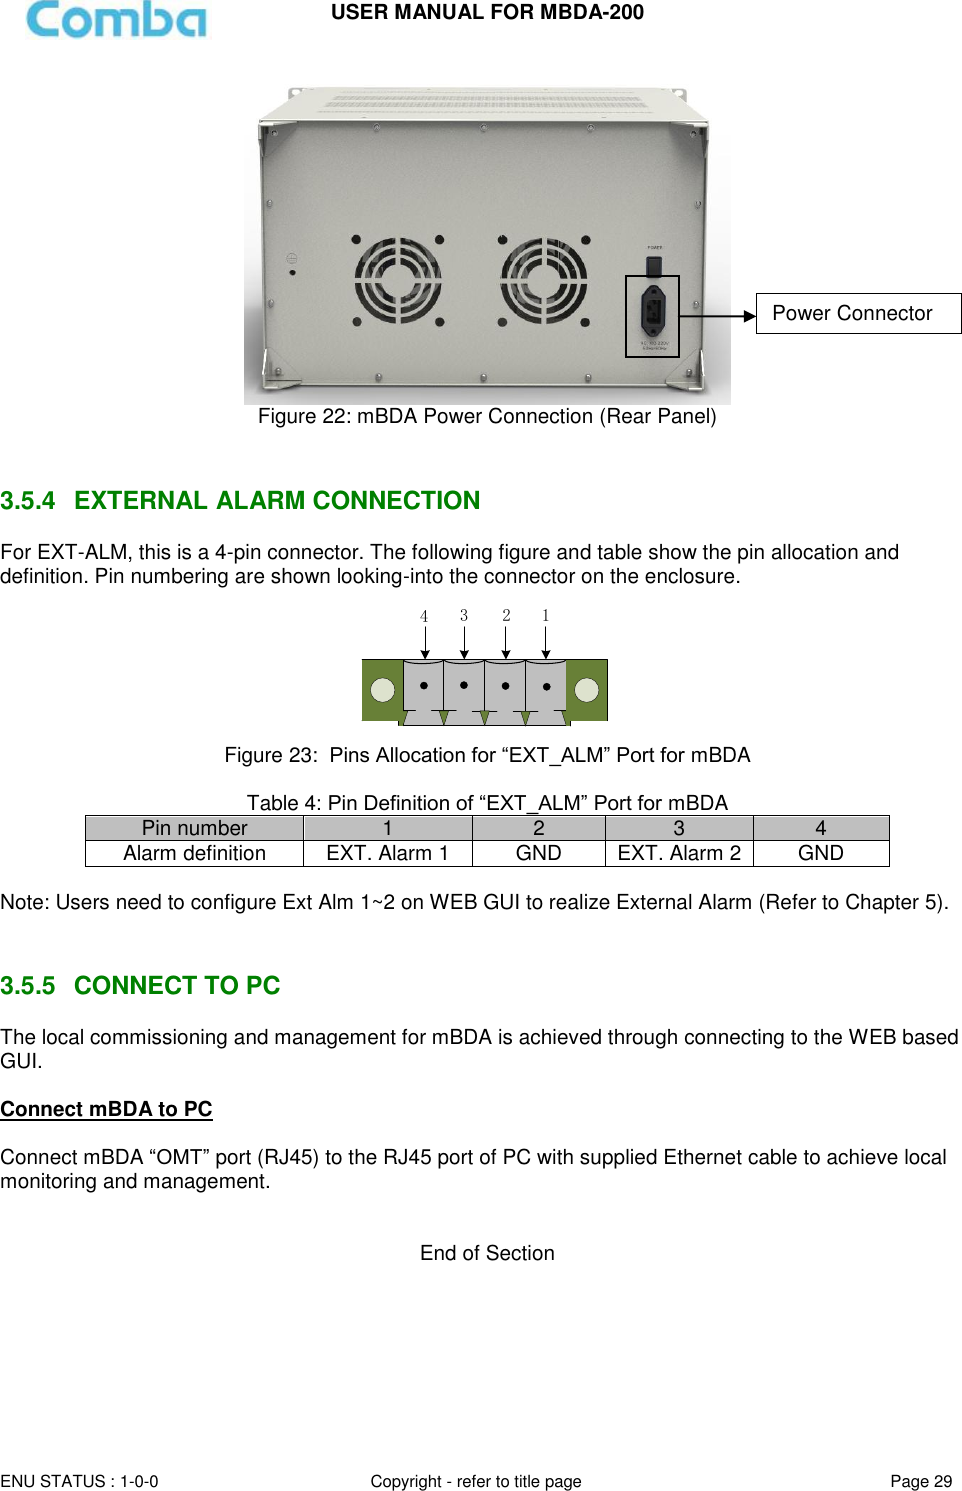 USER MANUAL FOR MBDA-200  ENU STATUS : 1-0-0 Copyright - refer to title page Page 29      Figure 22: mBDA Power Connection (Rear Panel)   3.5.4  EXTERNAL ALARM CONNECTION  For EXT-ALM, this is a 4-pin connector. The following figure and table show the pin allocation and definition. Pin numbering are shown looking-into the connector on the enclosure.  1234 Figure 23:  Pins Allocation for “EXT_ALM” Port for mBDA  Table 4: Pin Definition of “EXT_ALM” Port for mBDA Pin number 1 2 3 4 Alarm definition EXT. Alarm 1 GND EXT. Alarm 2 GND  Note: Users need to configure Ext Alm 1~2 on WEB GUI to realize External Alarm (Refer to Chapter 5).    3.5.5  CONNECT TO PC The local commissioning and management for mBDA is achieved through connecting to the WEB based GUI.  Connect mBDA to PC  Connect mBDA “OMT” port (RJ45) to the RJ45 port of PC with supplied Ethernet cable to achieve local monitoring and management.    End of Section Power Connector 